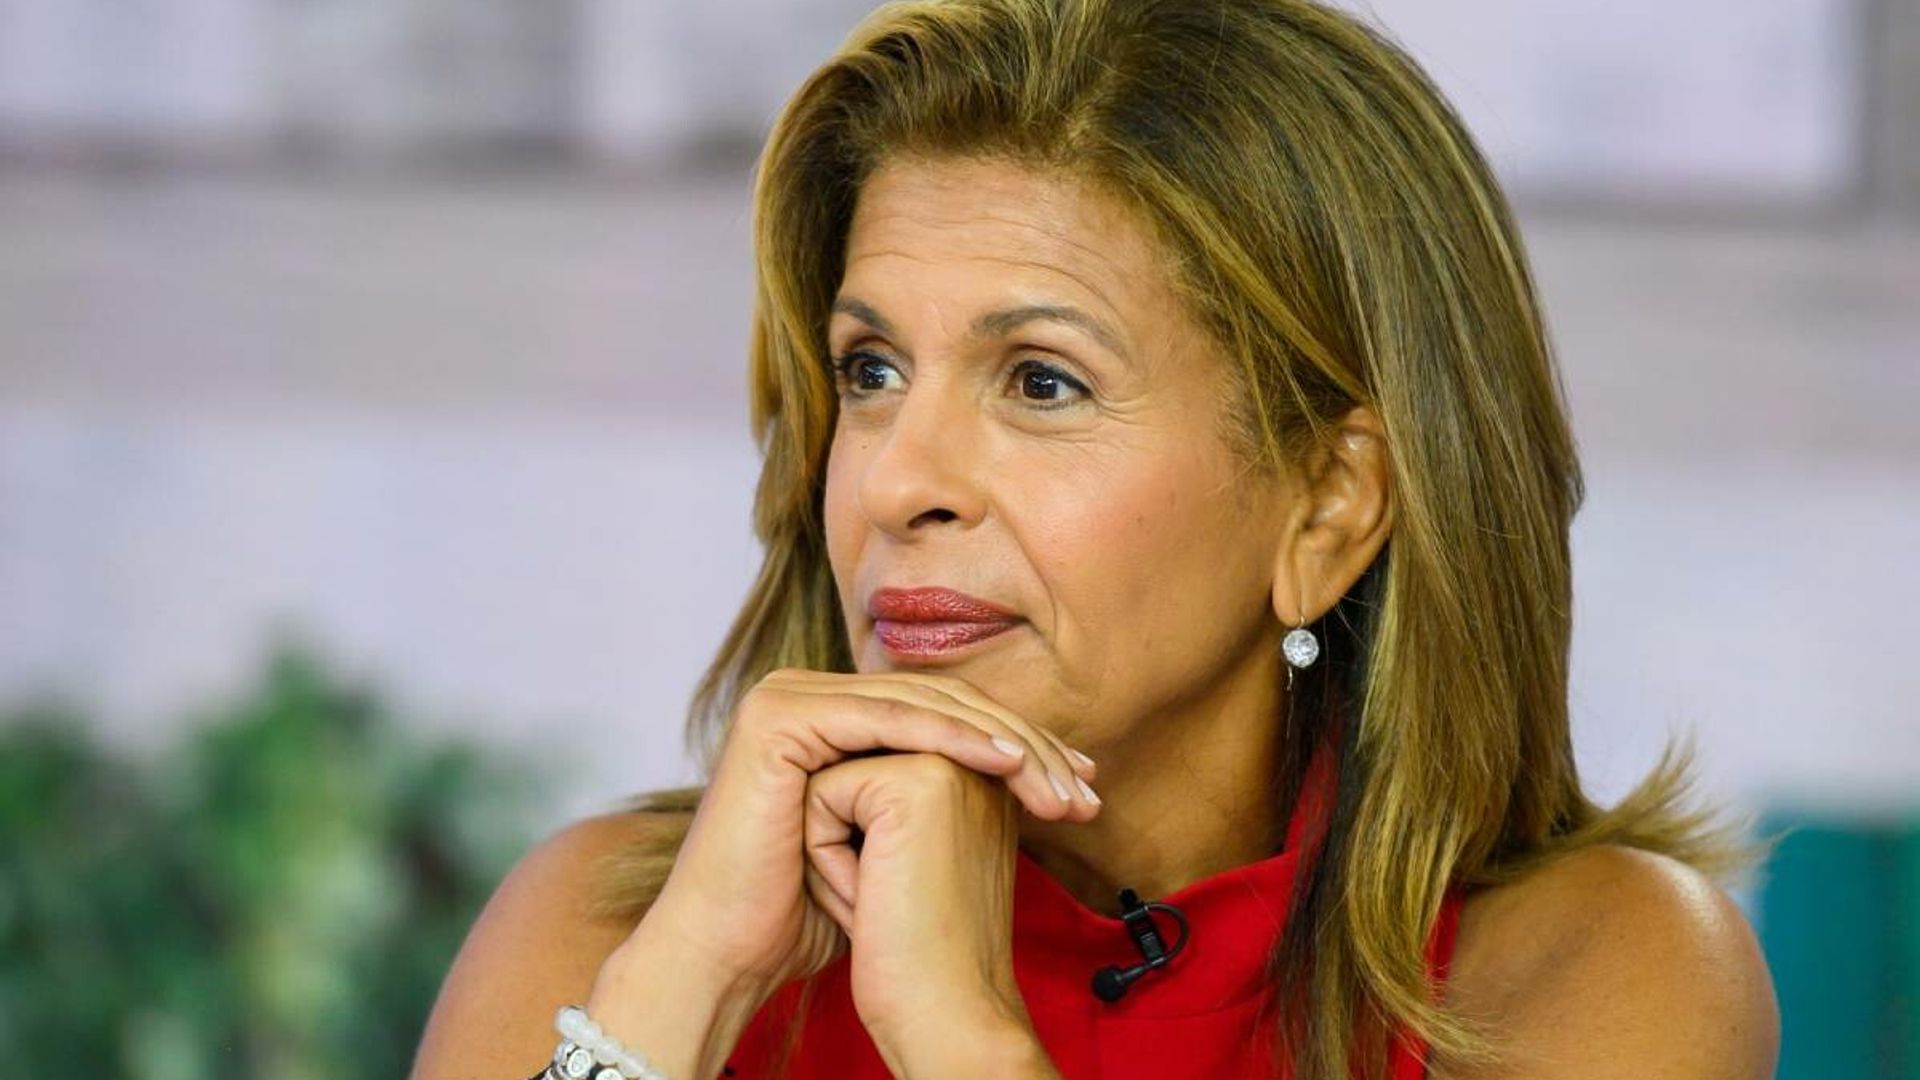 Hoda Kotb shares disappointing update on adoption of third baby